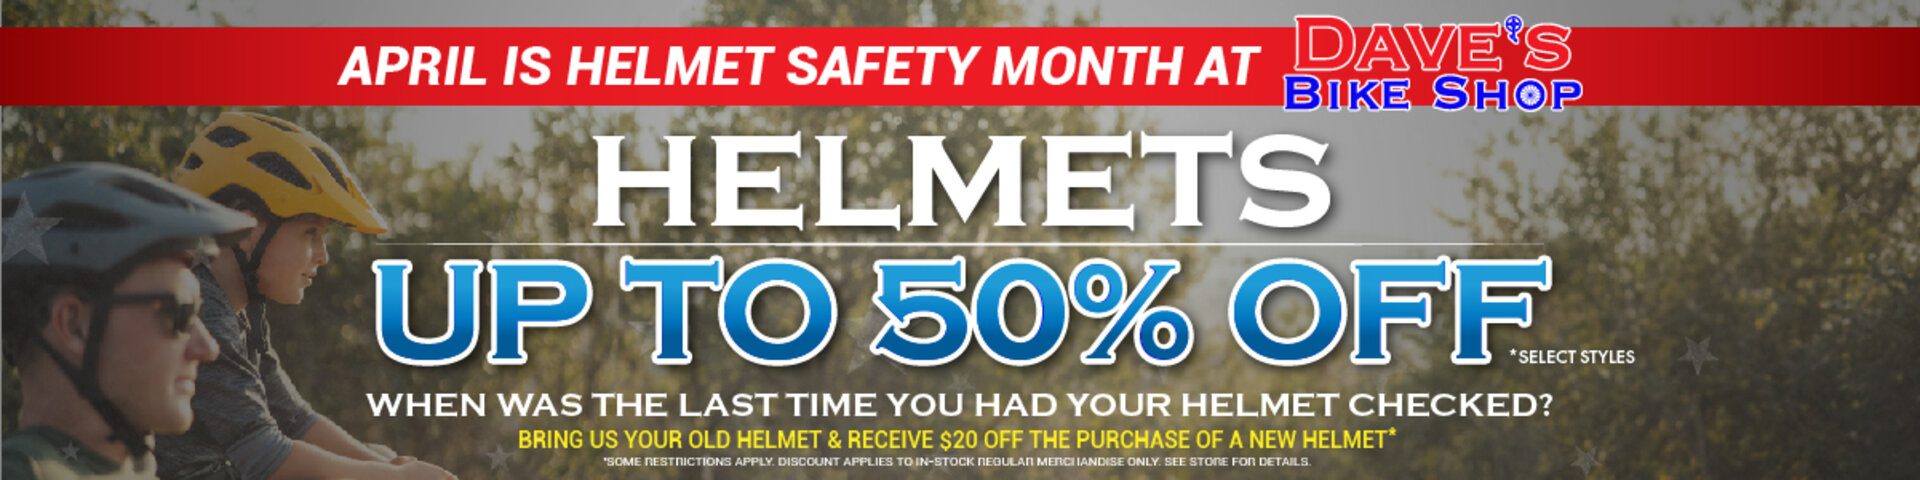 Helmets up to 50% off at Dave's Bike Shop